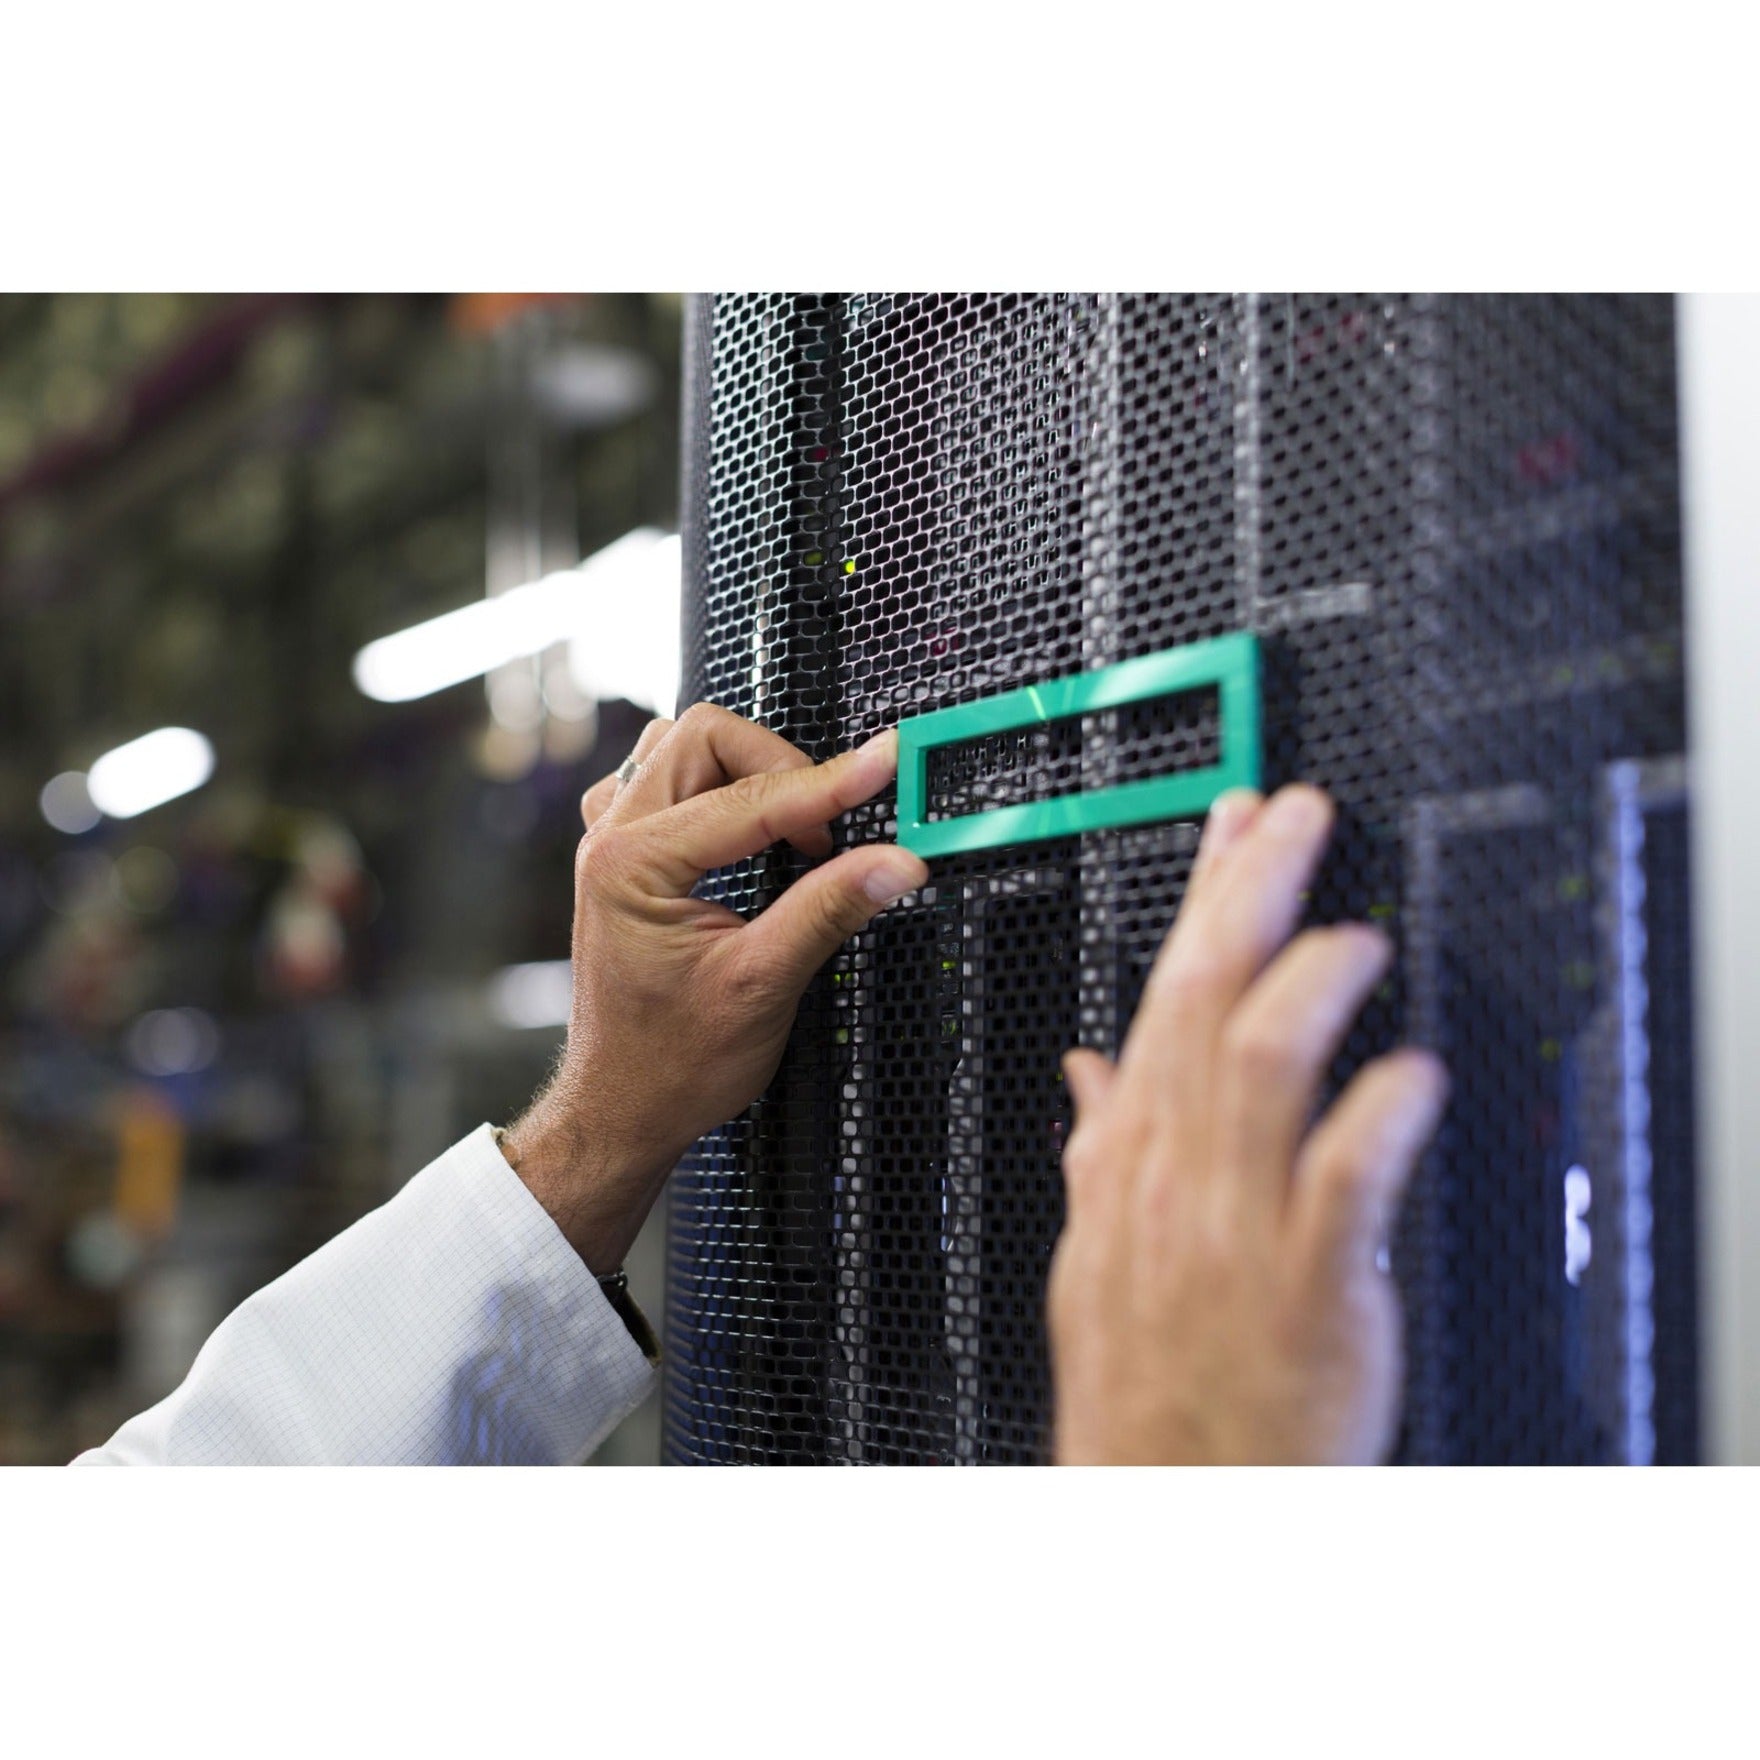 HPE 875780-B21 DL38X Gen10 2 x8 PCIe Tertiary Riser Kit, Expand Your Server's I/O Capabilities